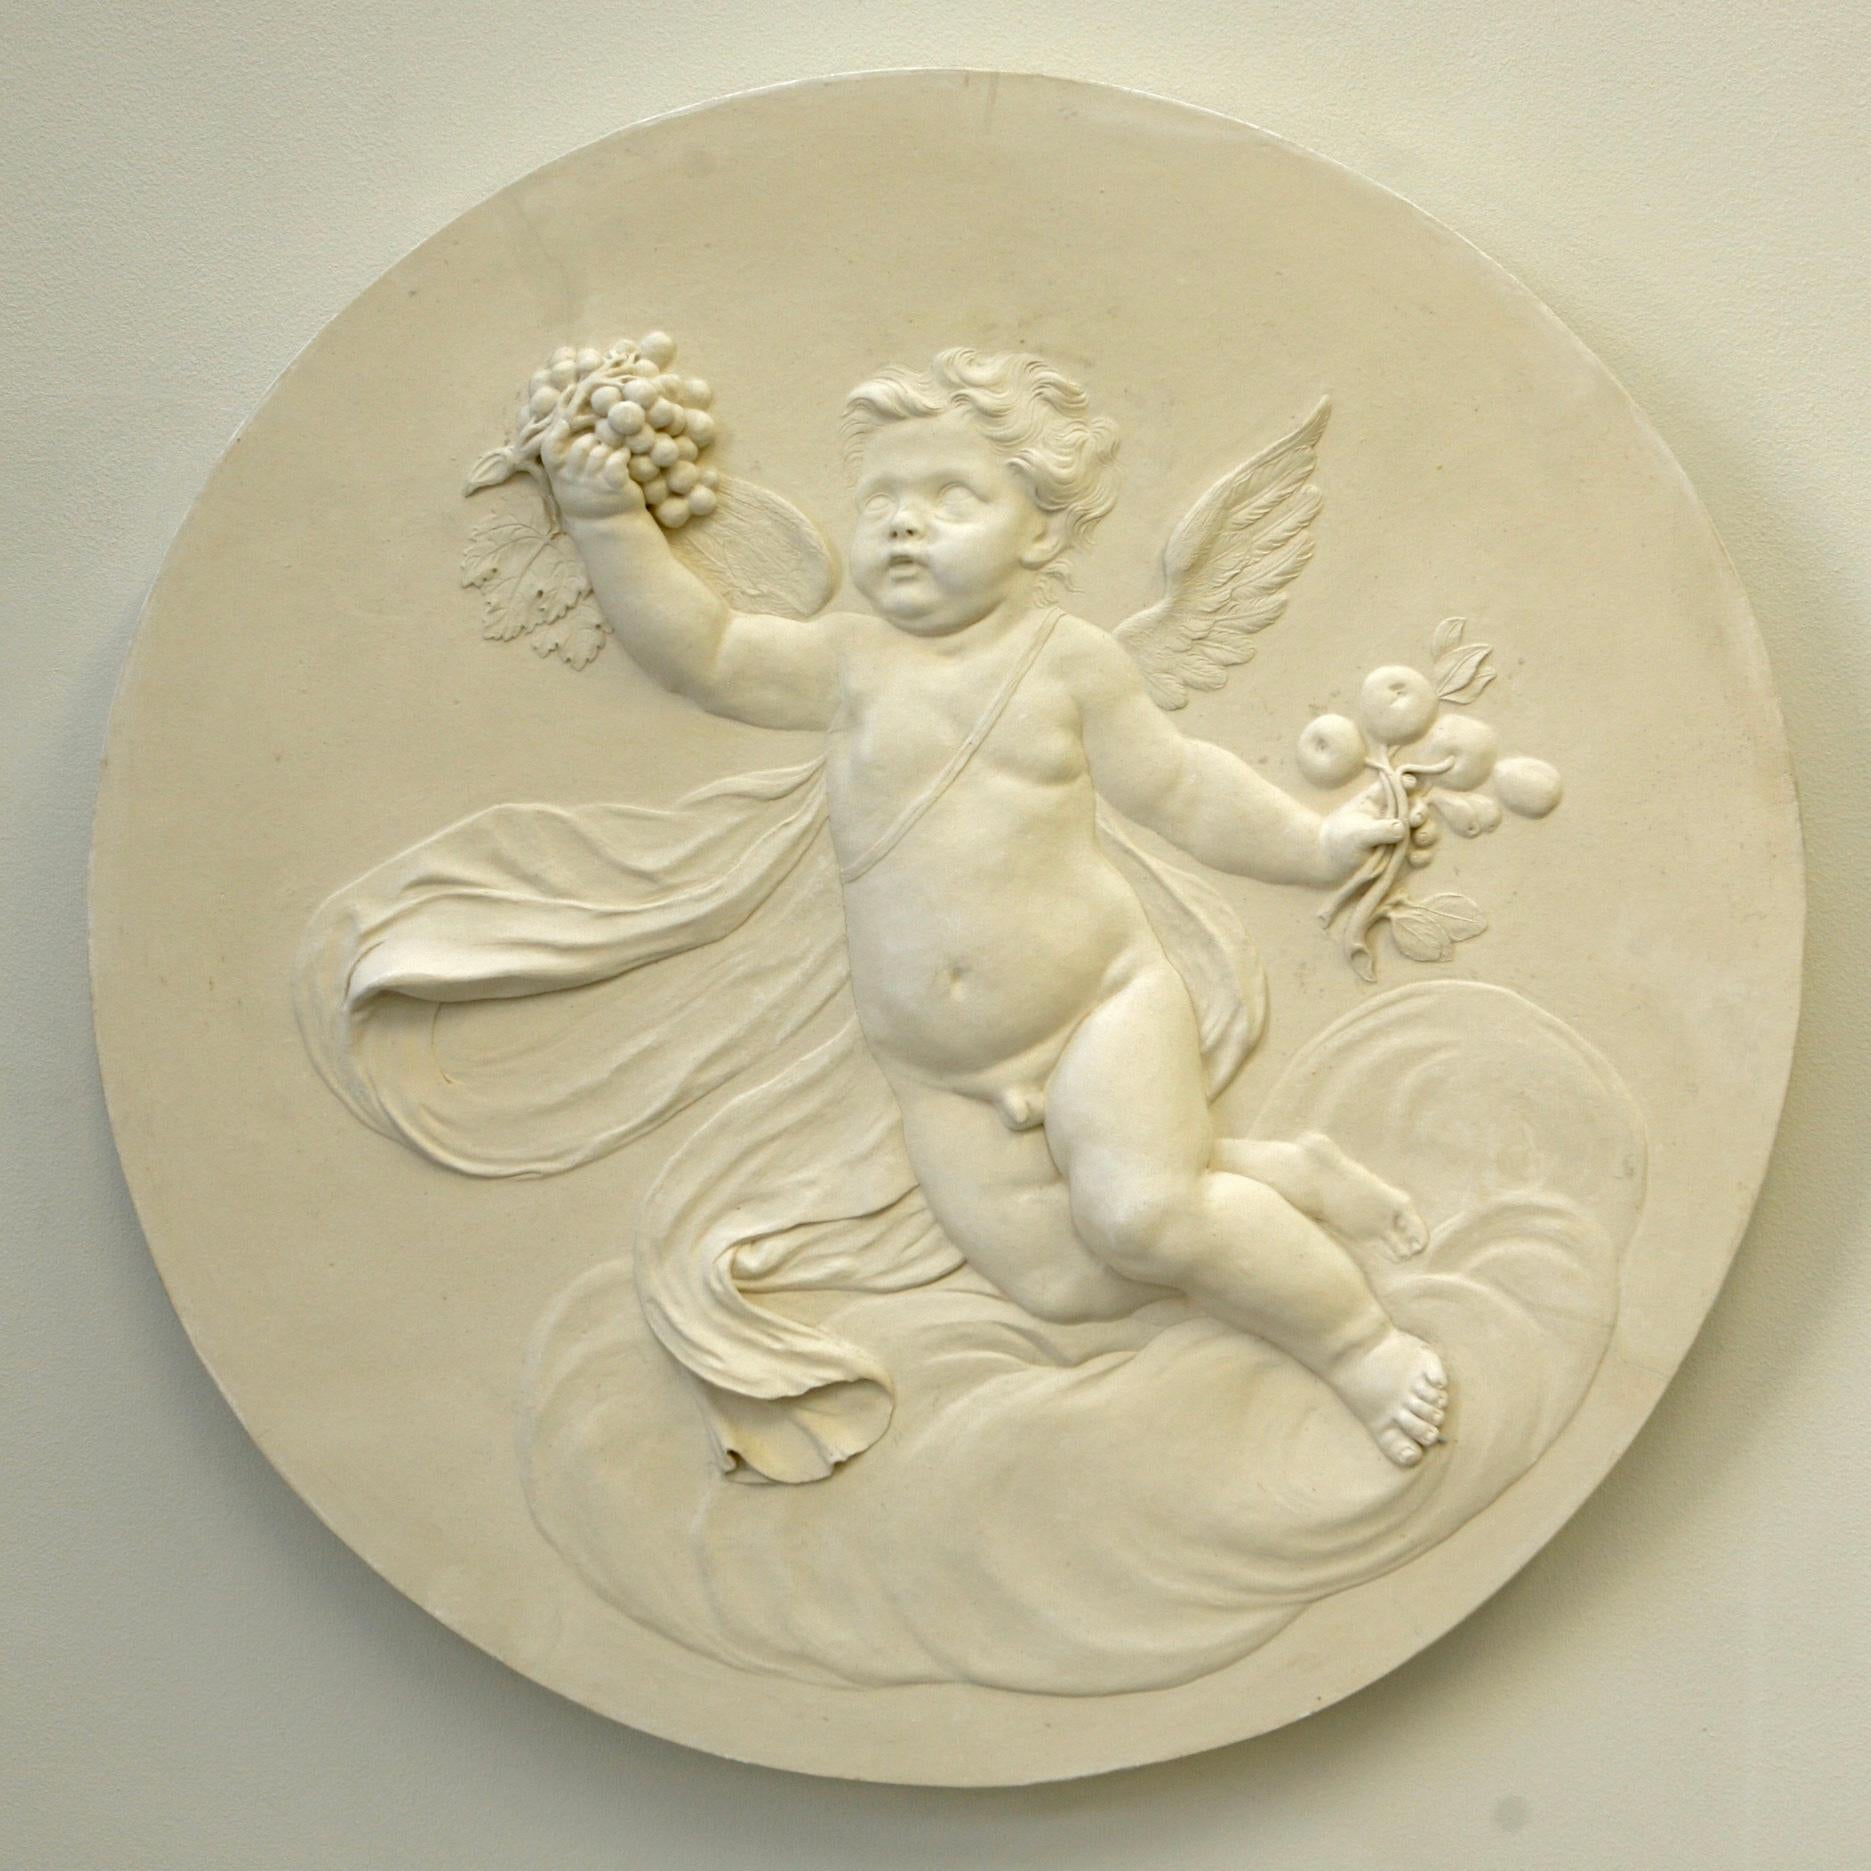 Coade Studio decorative Coade Stone roundel, modelled in delicate low relief. The four seasons roundels are influenced by the 18th century Coade designs. They can be placed indoor or outdoors. Coade Stone works particularly well outdoors, as it